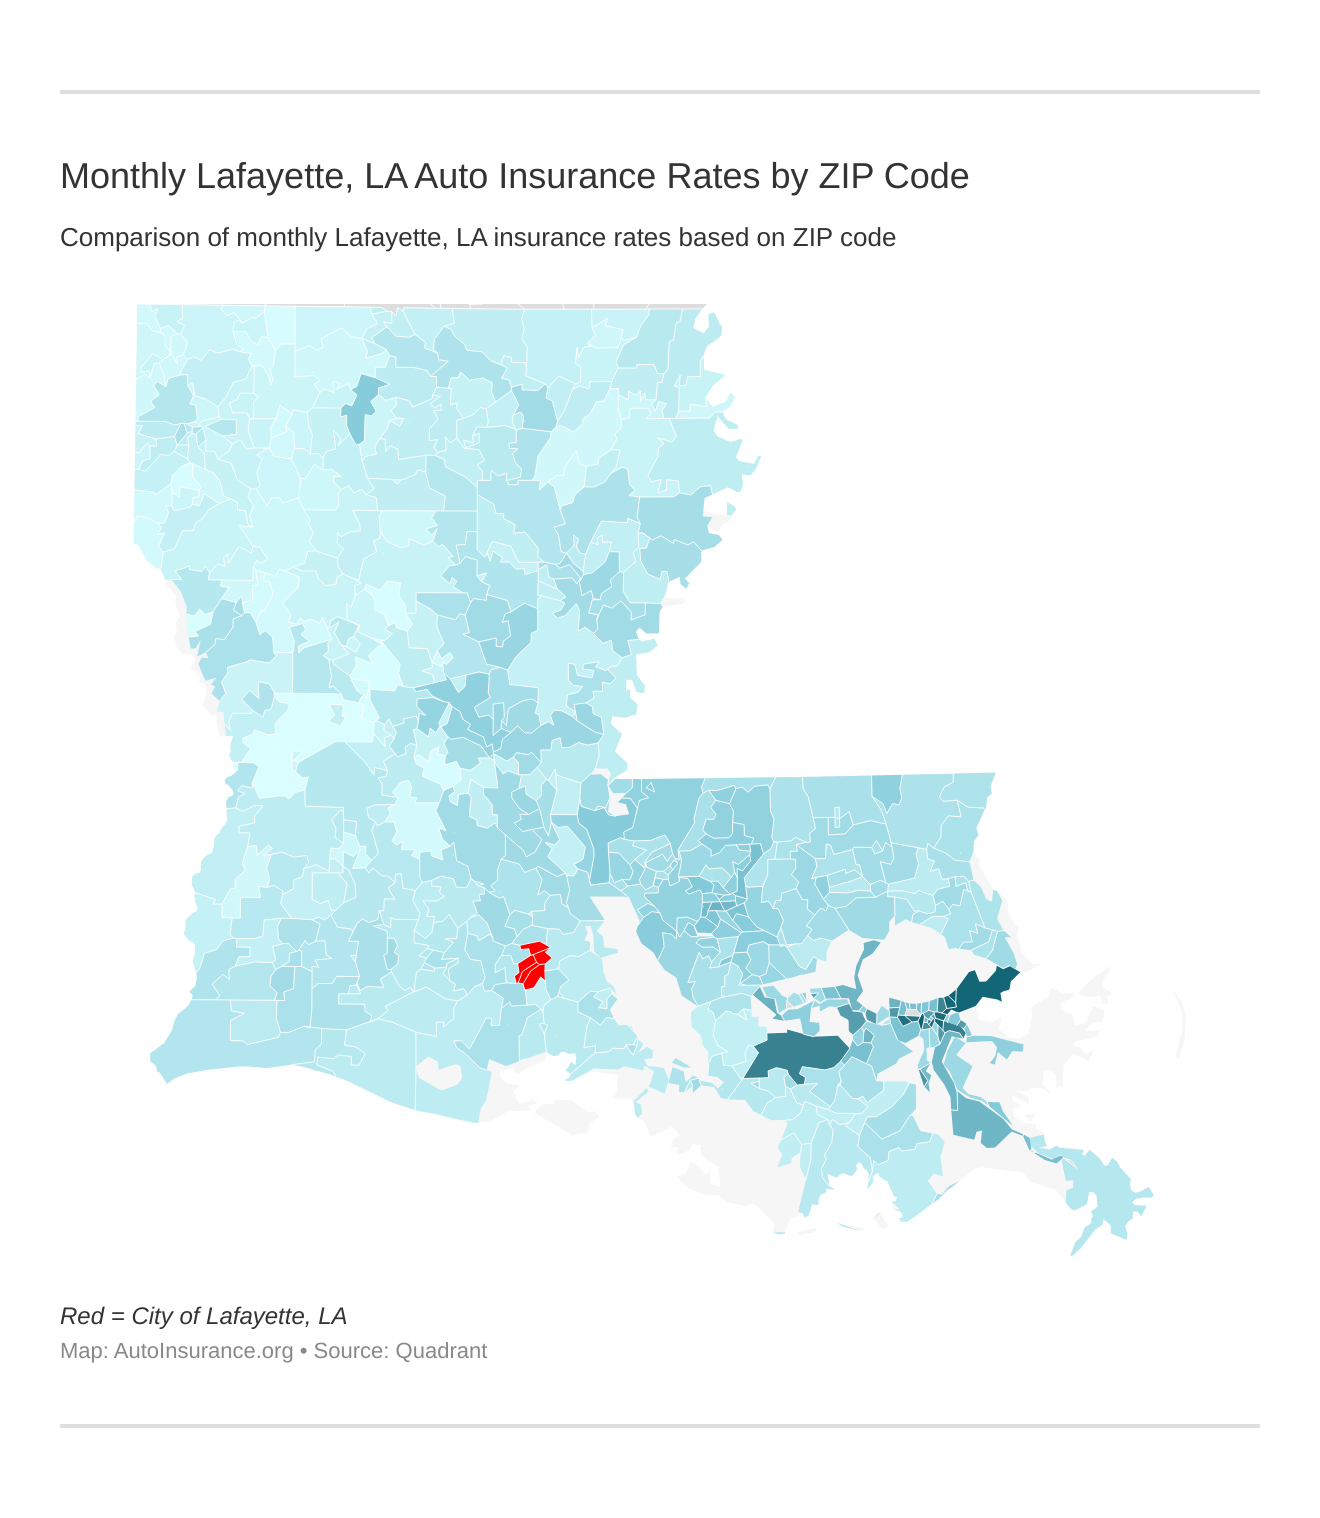 Monthly Lafayette, LA Auto Insurance Rates by ZIP Code